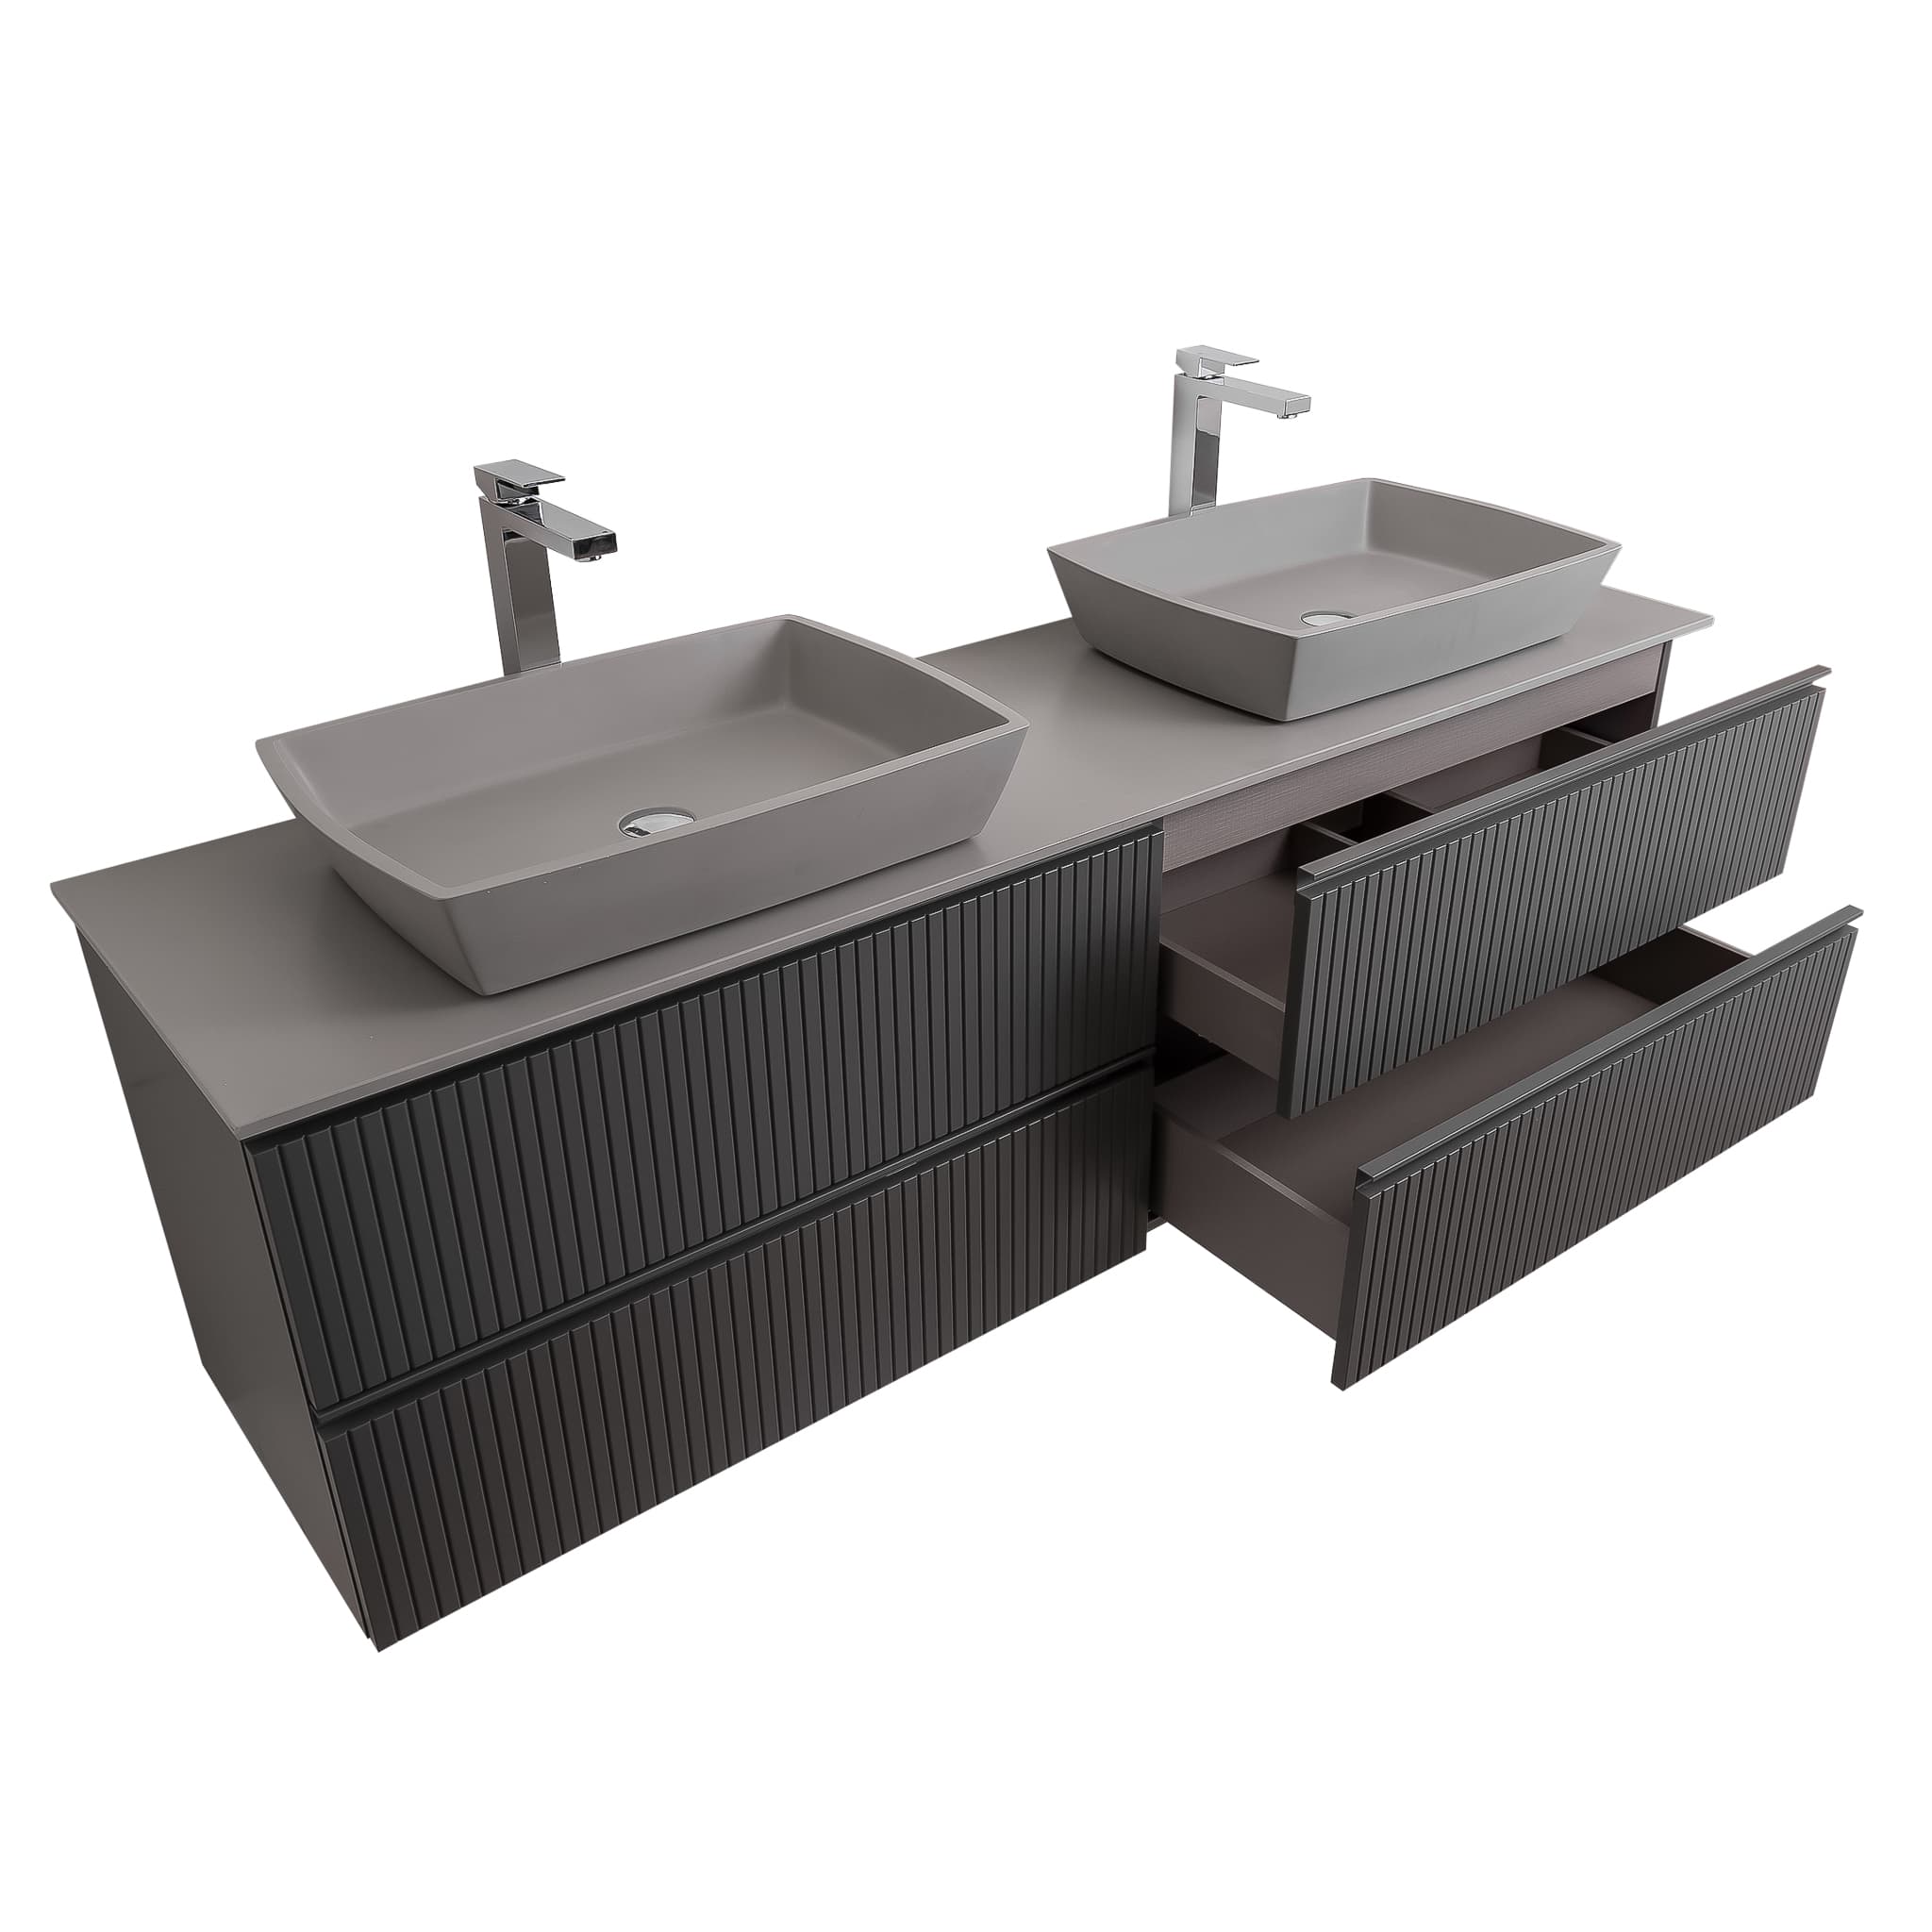 Ares 72 Matte Grey Cabinet, Solid Surface Flat Grey Counter And Two Square Solid Surface Grey Basin 1316, Wall Mounted Modern Vanity Set